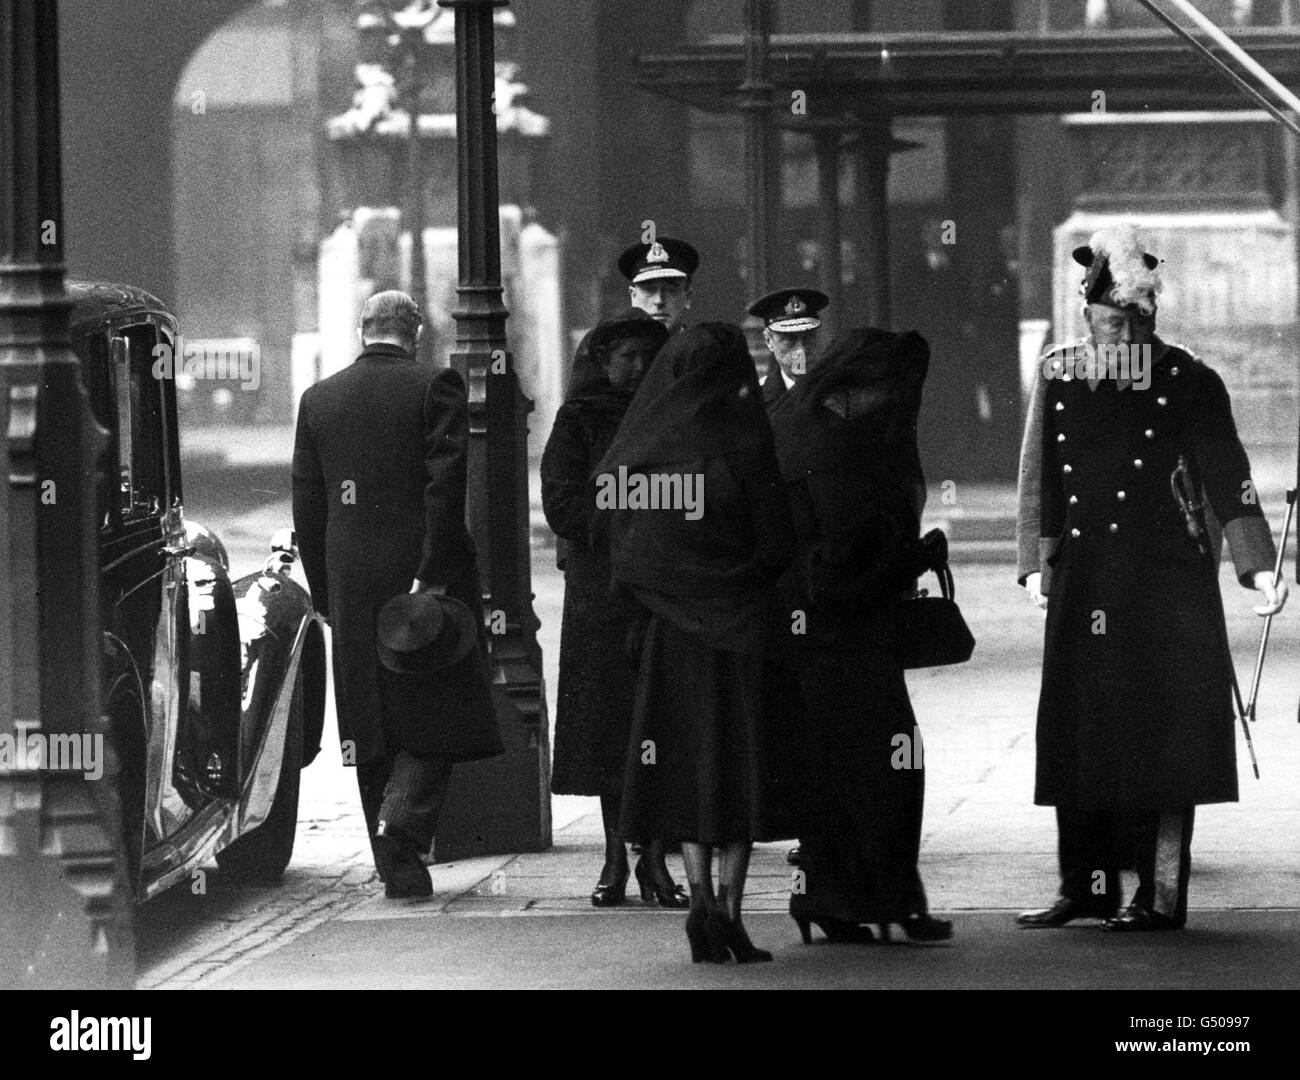 Members of the Royal Family arrive at Westminster Hall, London, before the funeral procession of King George VI: The Princess Elizabeth (later Queen Elizabeth II) (back to camera), Queen Elizabeth (later the Queen Mother) (right), The Duke of Windsor (behind Queen Mother), Earl Mountbatten (next to Duke), and the Earl Marshall (Duke of Norfolk). Stock Photo